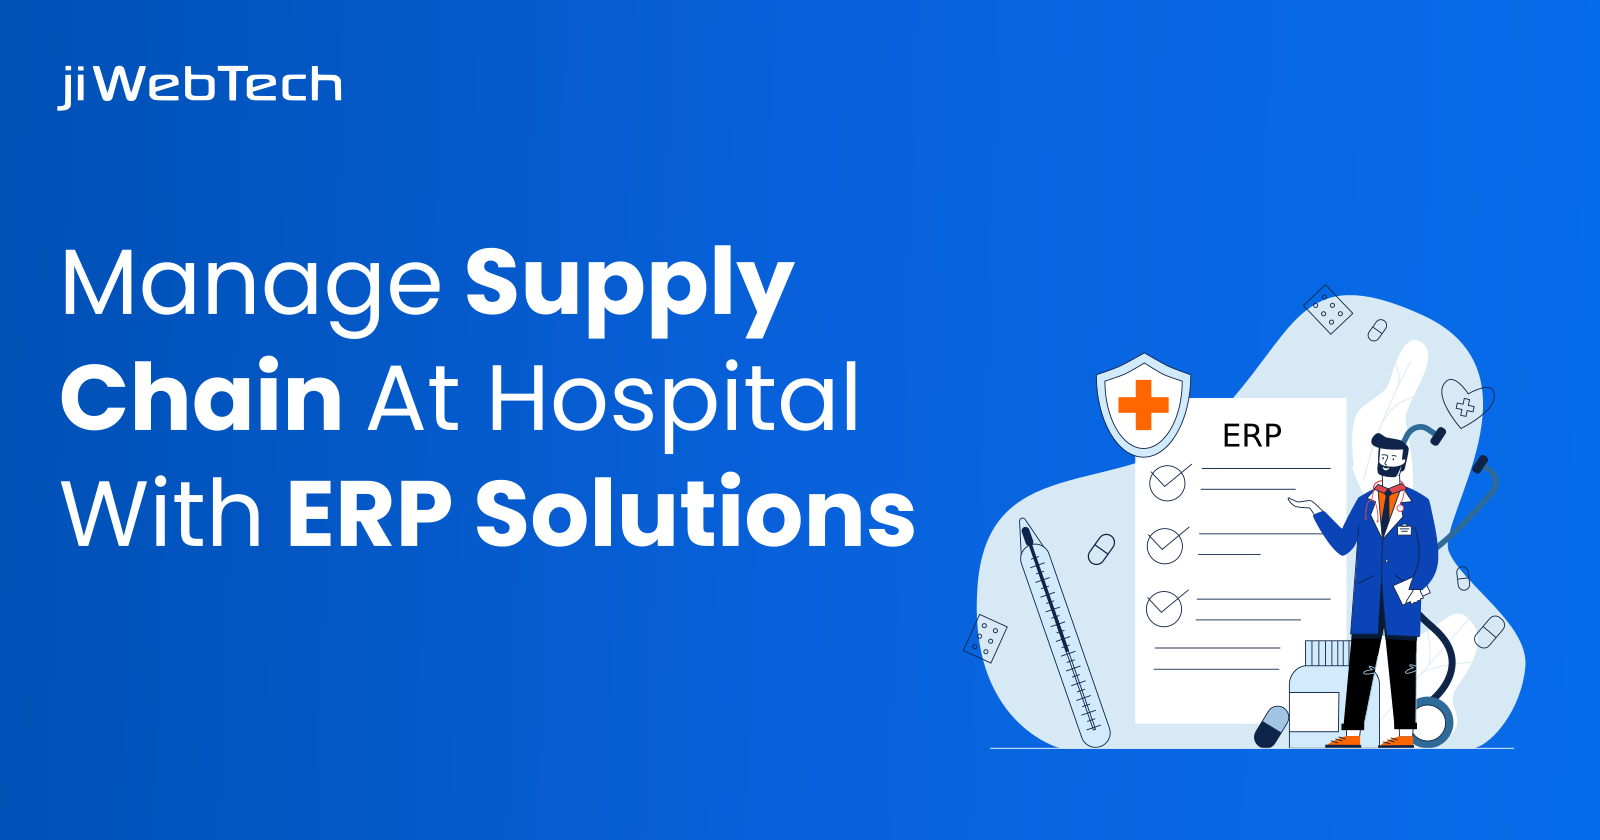 How Can Hospitals Manage Their Supply Chain With ERP Solutions?